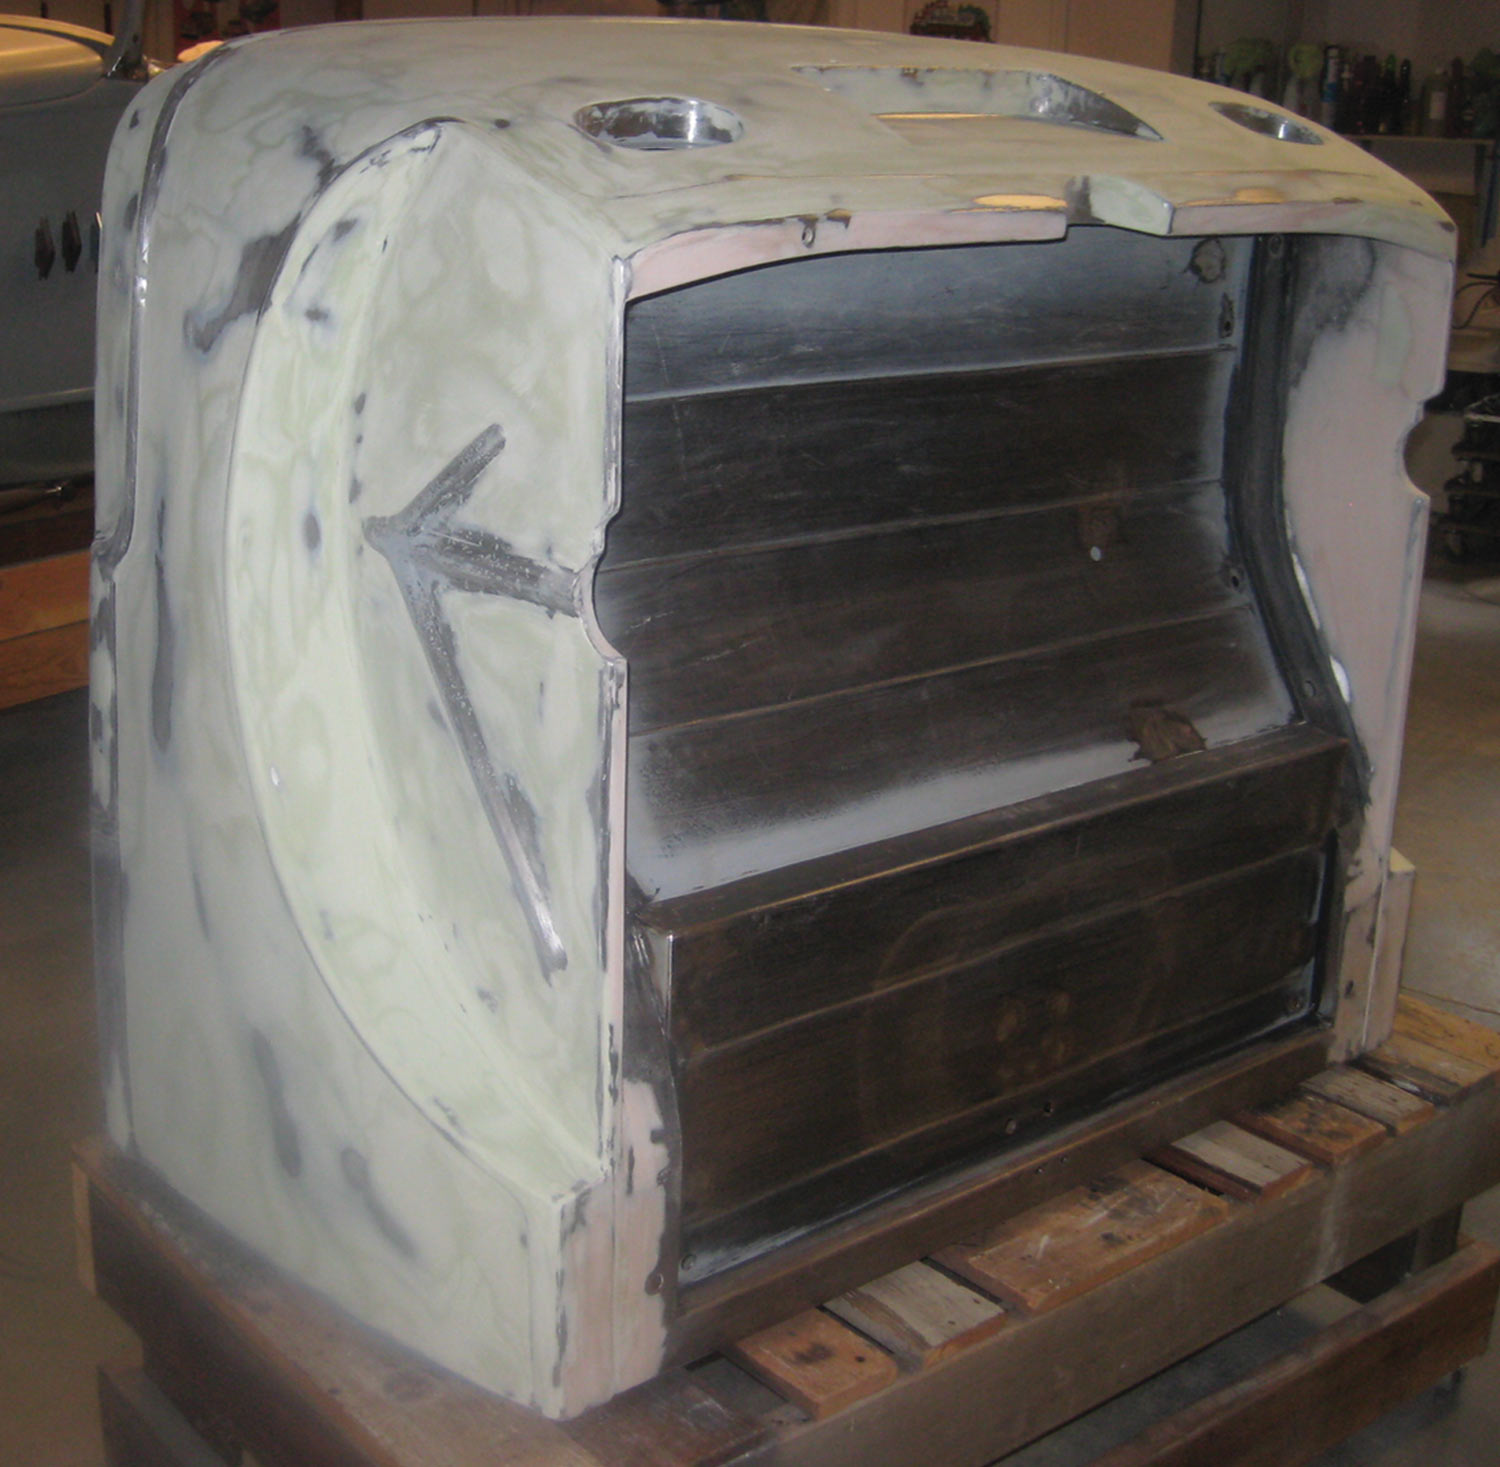 the back section of the body sits on its face, covered with a skim coat of filler